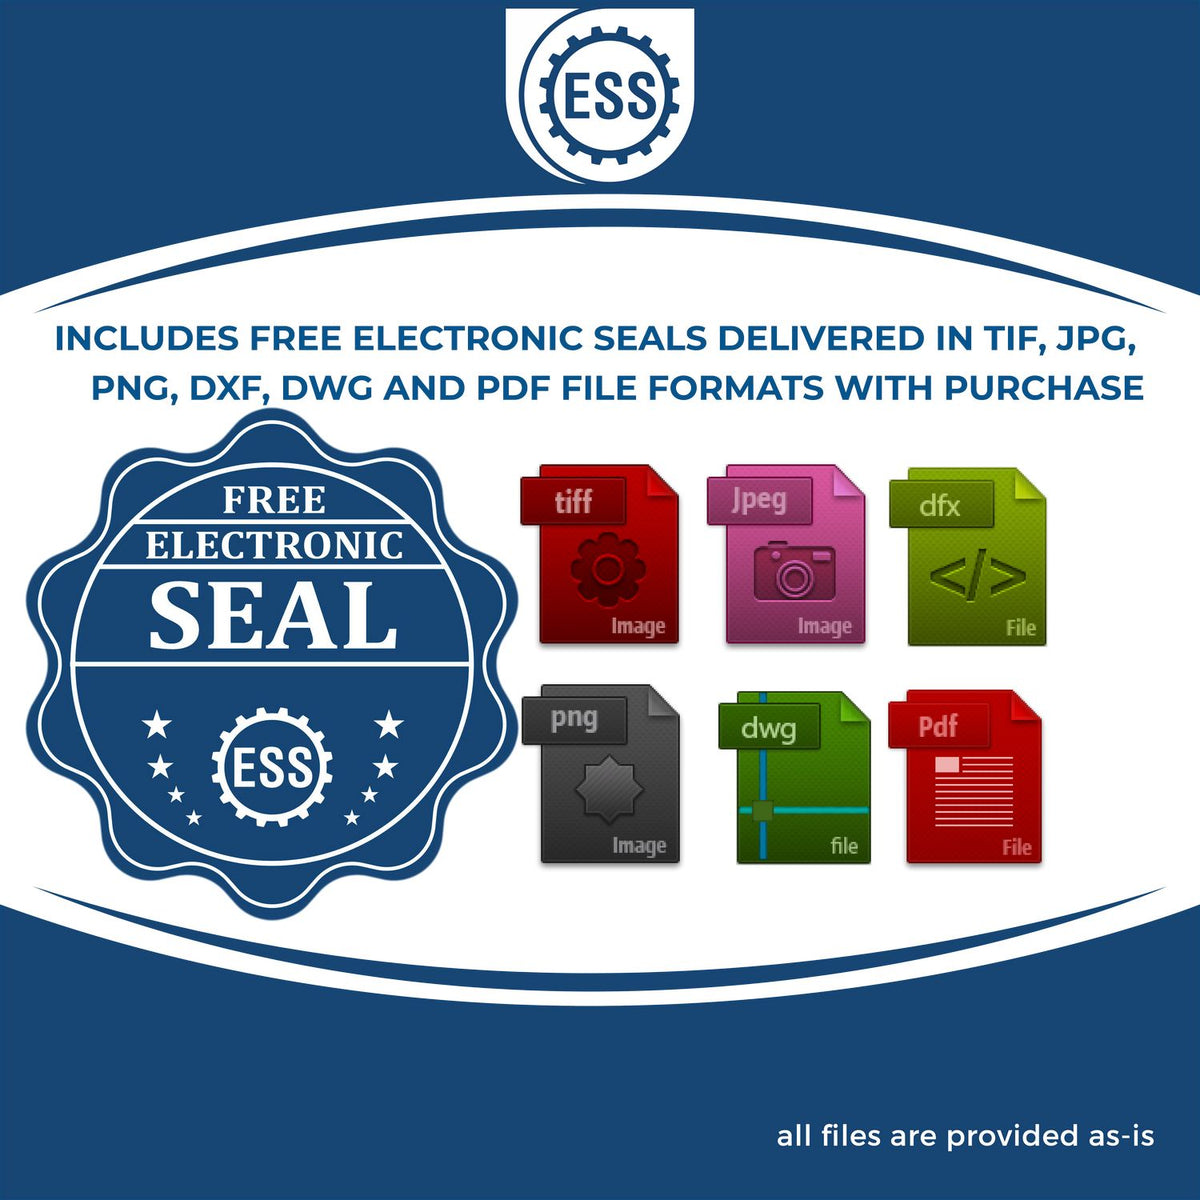 An infographic for the free electronic seal for the State of Texas Long Reach Architectural Embossing Seal illustrating the different file type icons such as DXF, DWG, TIF, JPG and PNG.